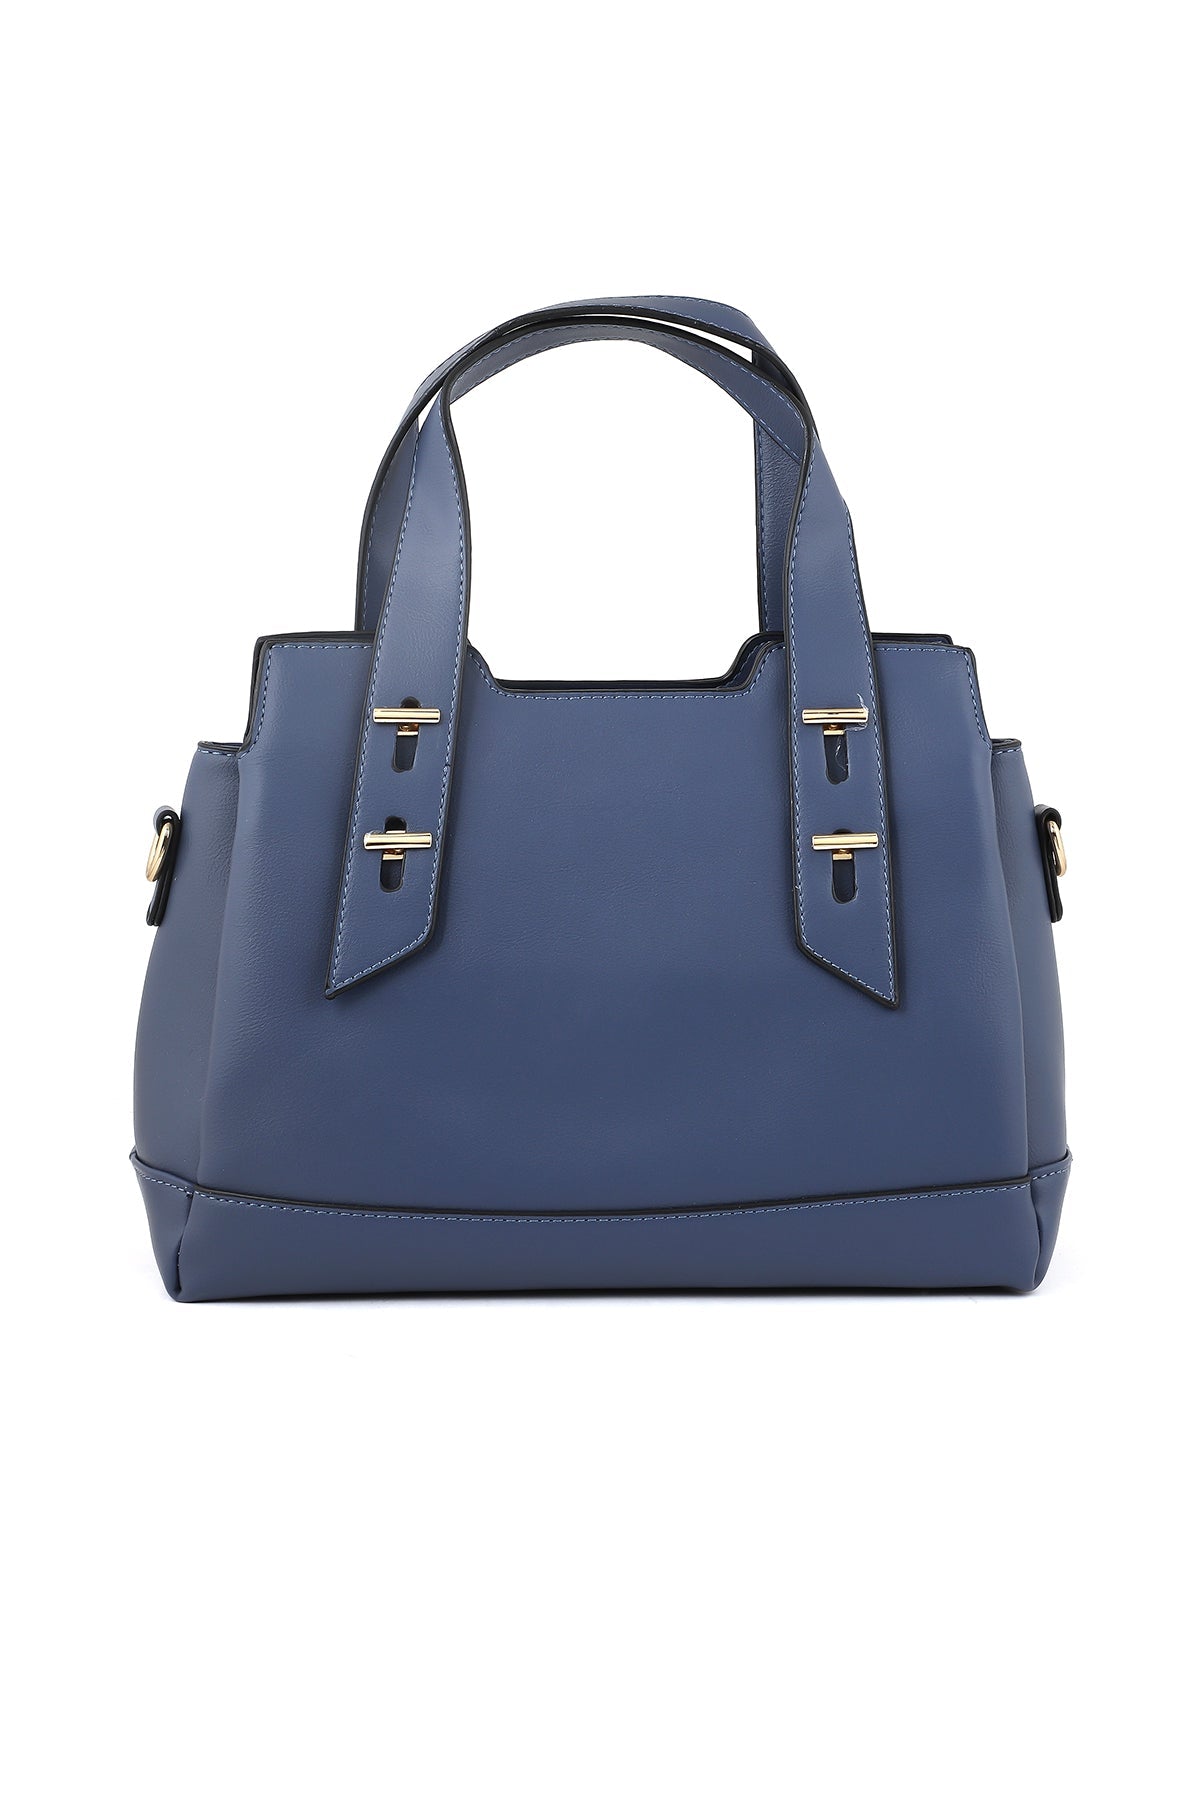 Casual Tote Hand Bags B14939-Blue